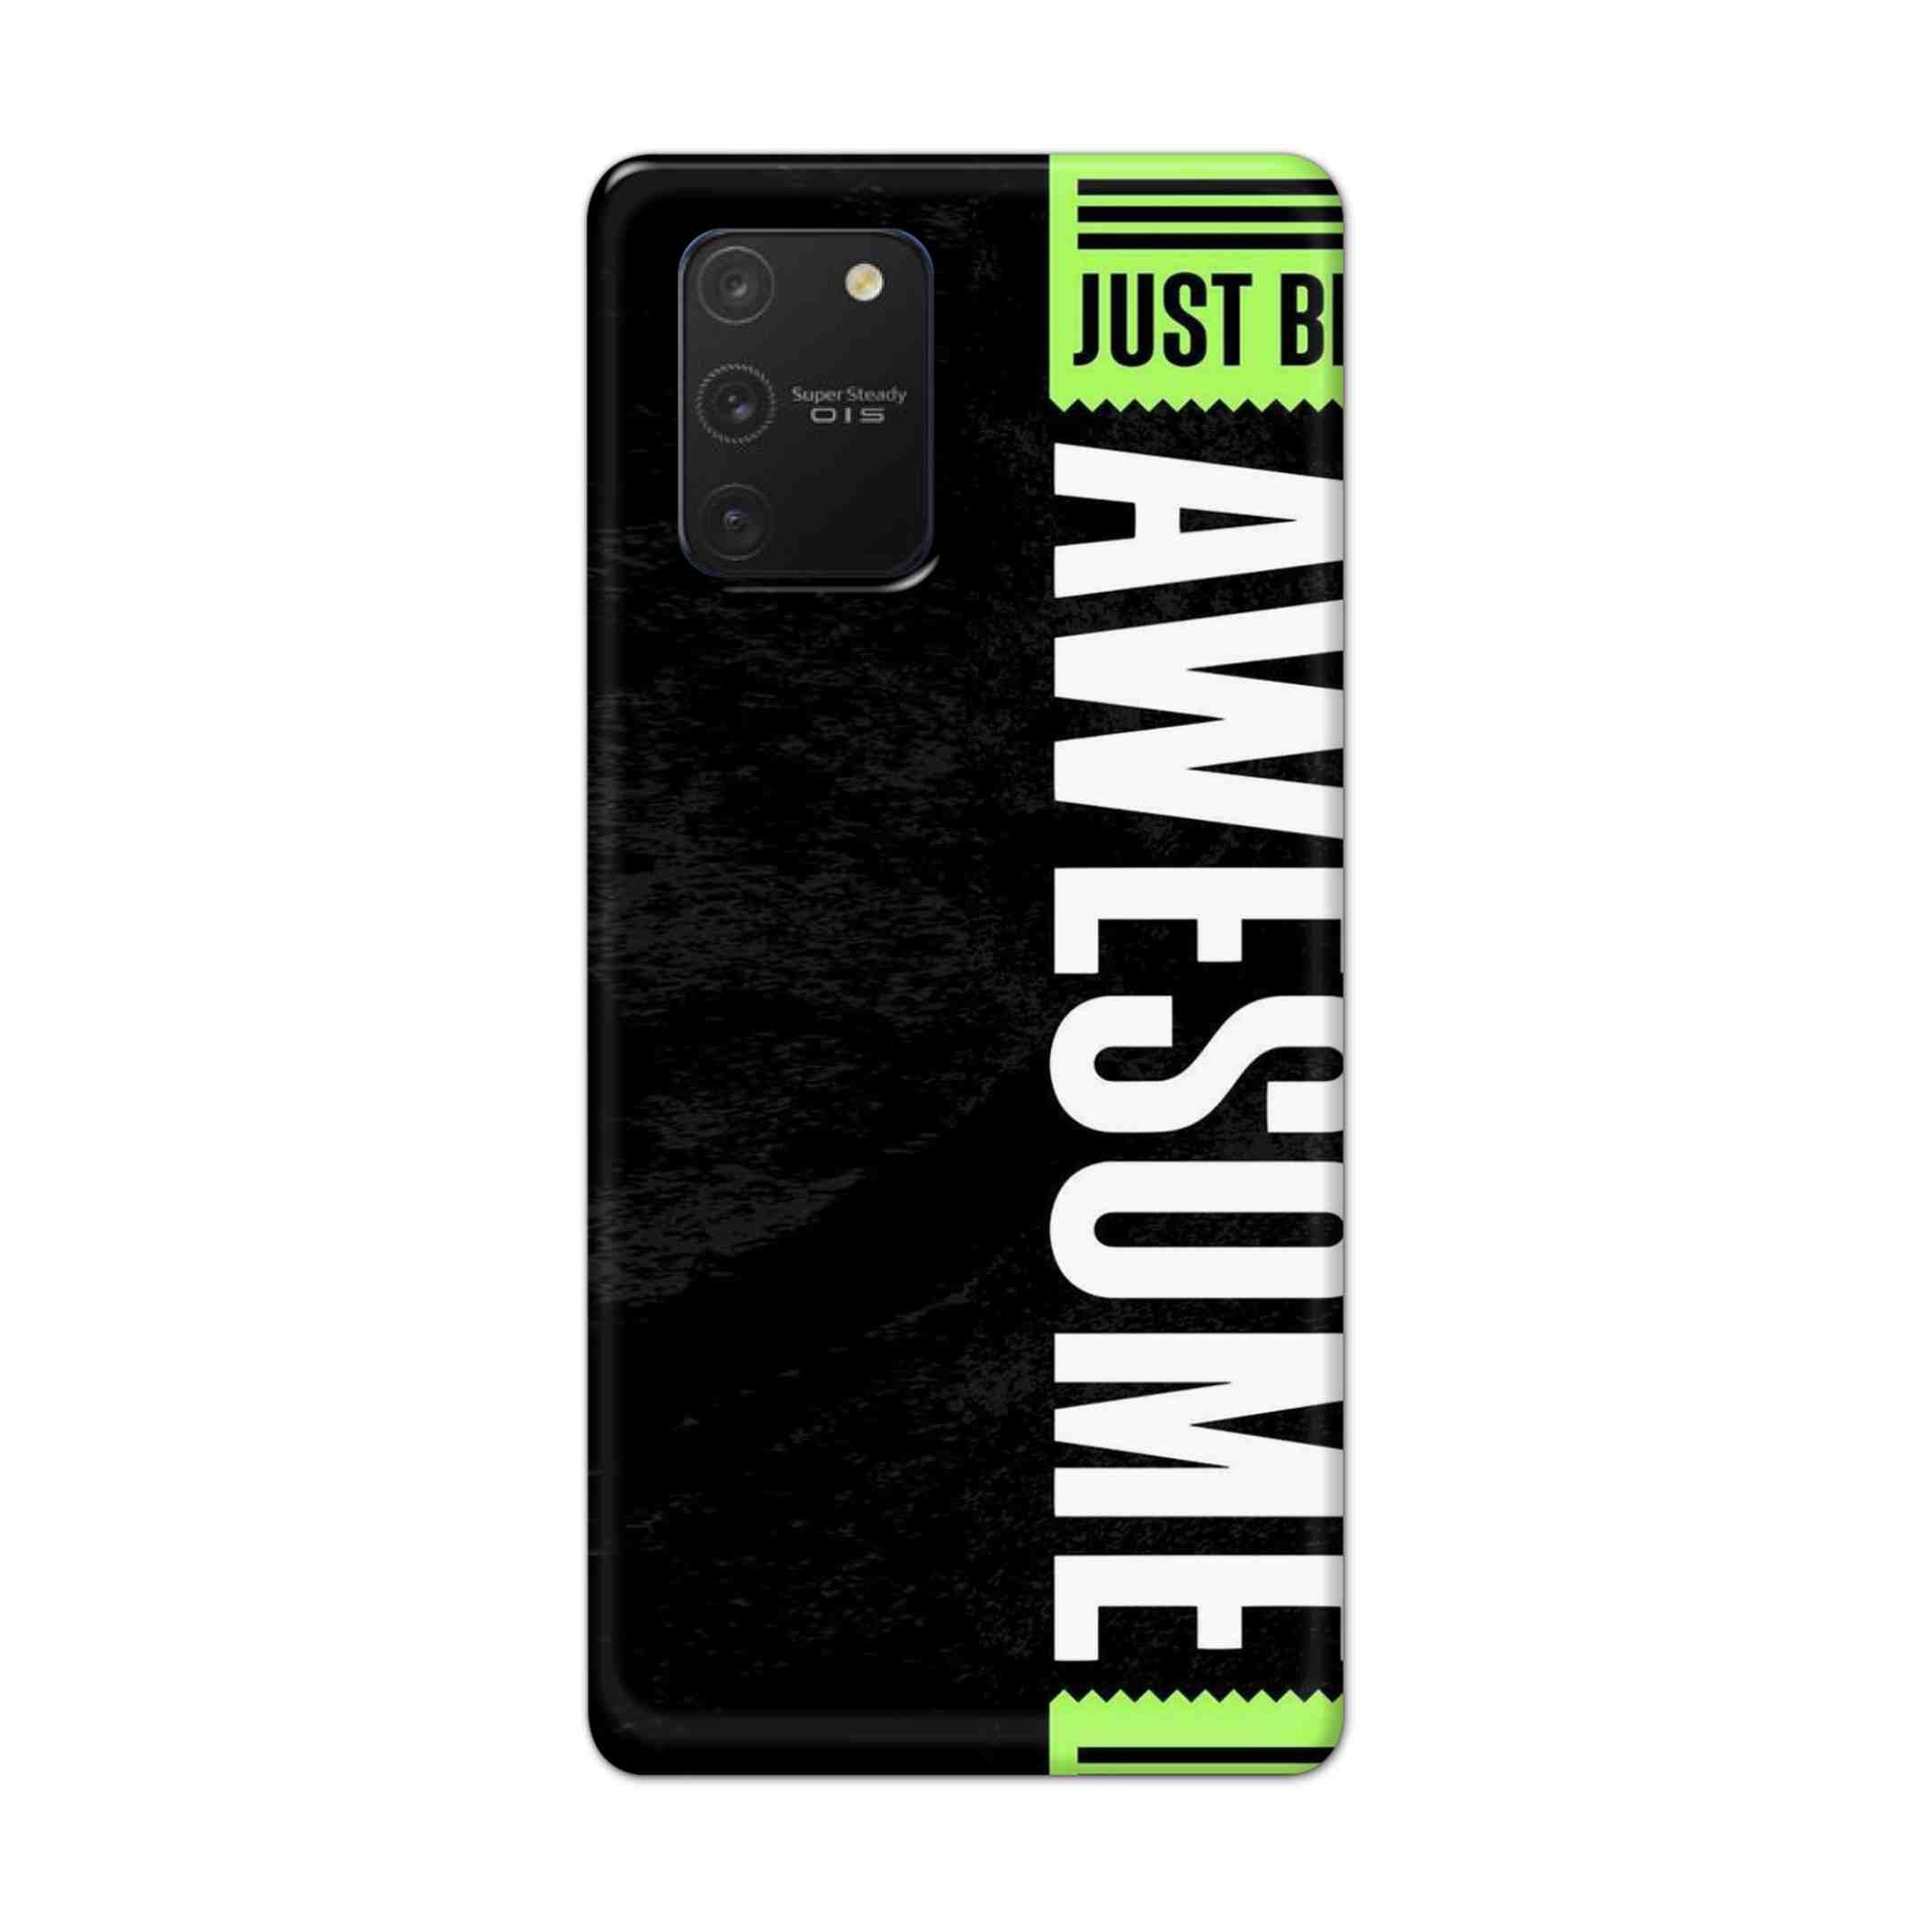 Buy Awesome Street Hard Back Mobile Phone Case Cover For Samsung Galaxy S10 Lite Online